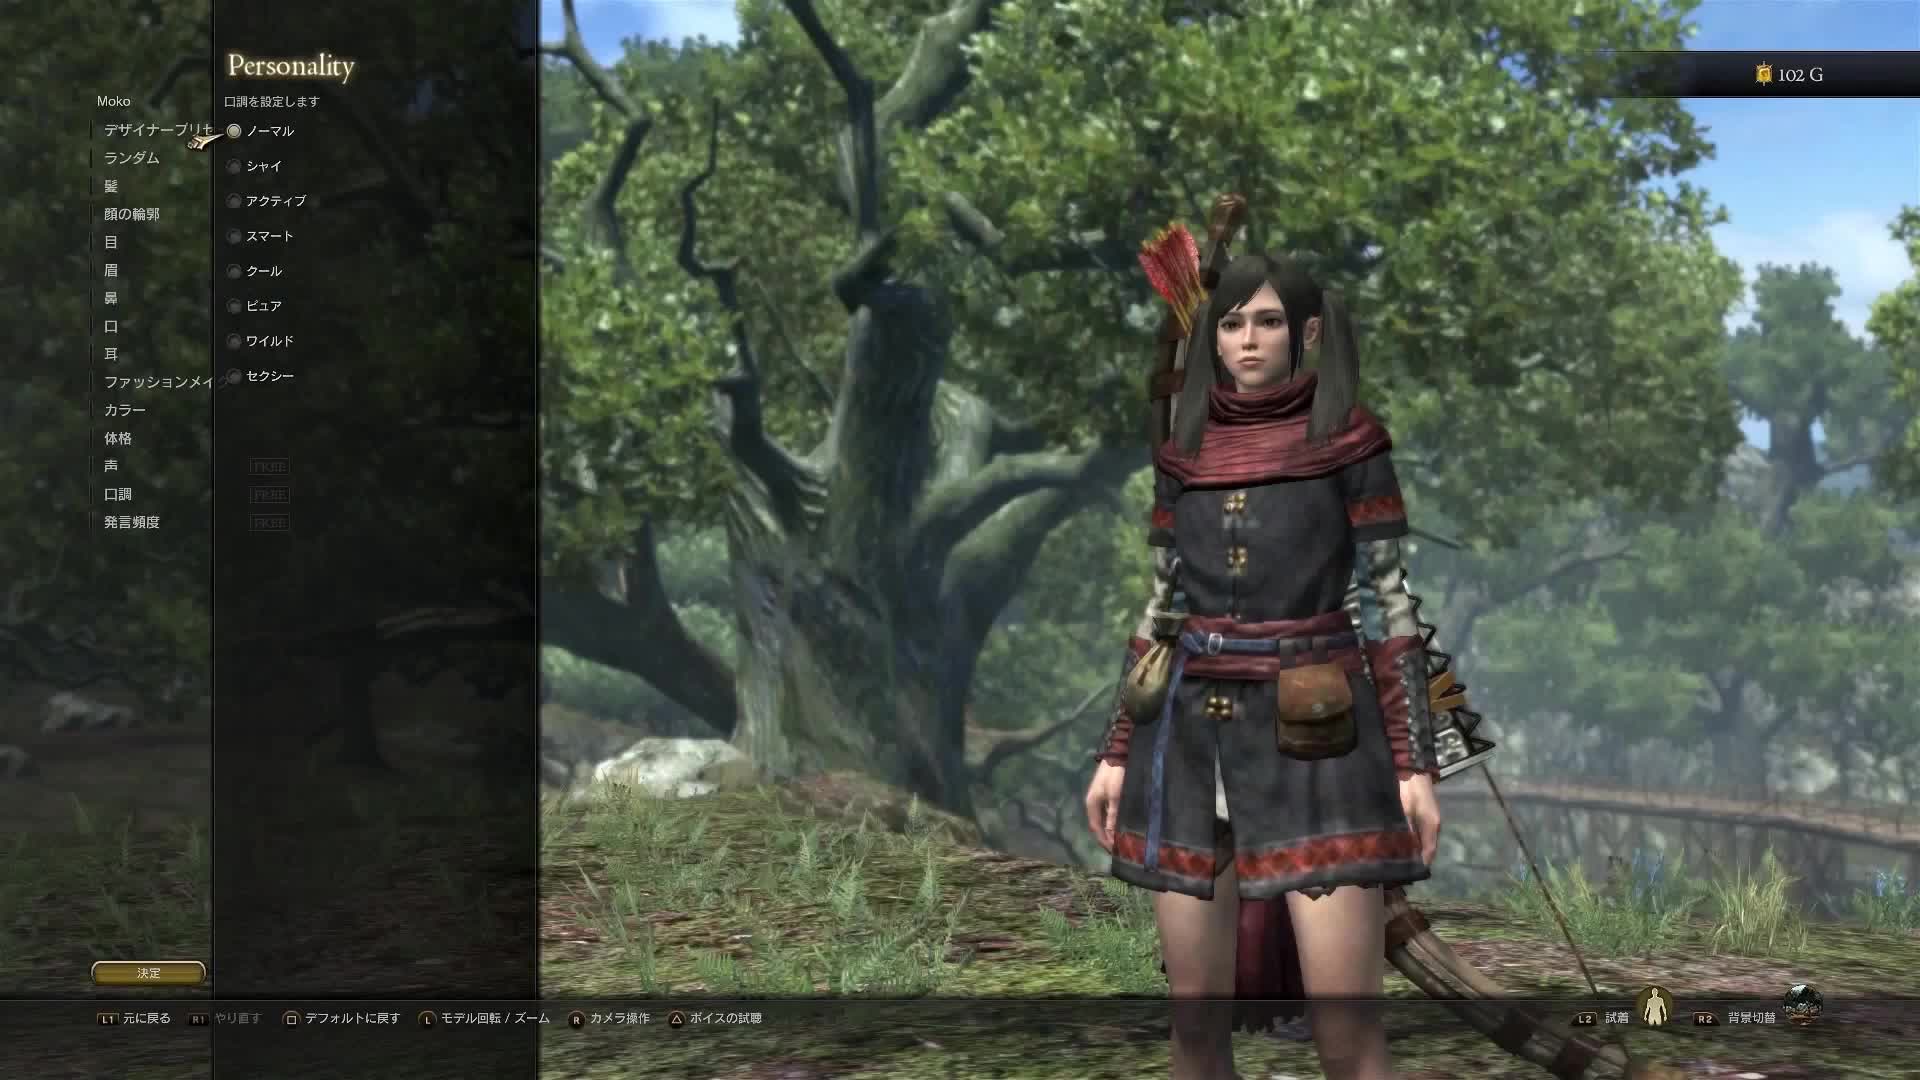 Dragons Dogma Online - Pawn Introduction Trailer